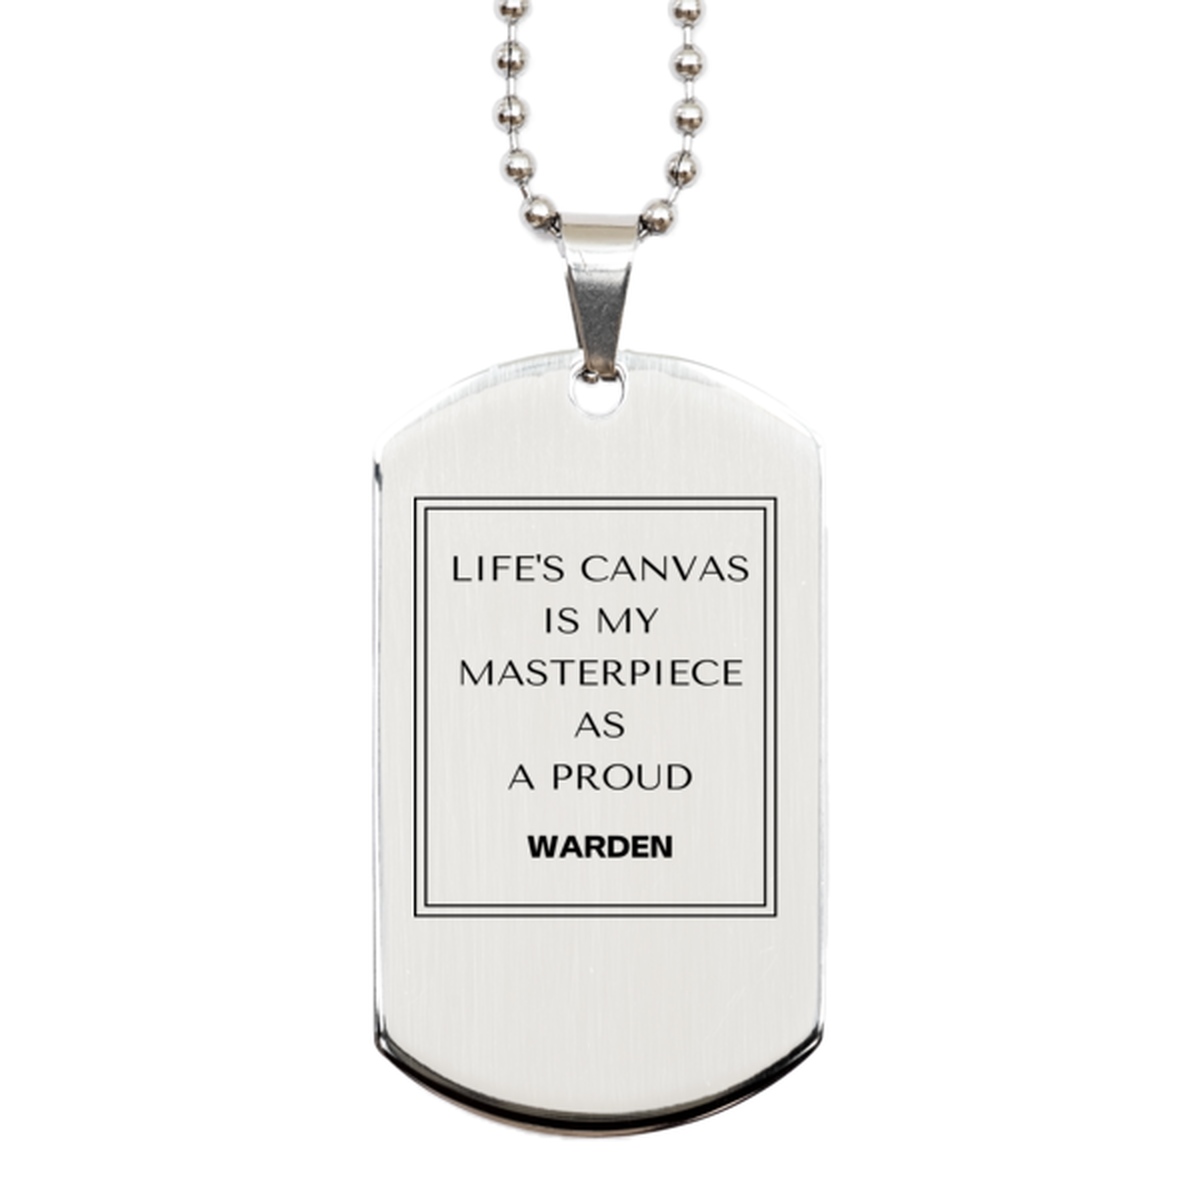 Proud Warden Gifts, Life's canvas is my masterpiece, Epic Birthday Christmas Unique Silver Dog Tag For Warden, Coworkers, Men, Women, Friends